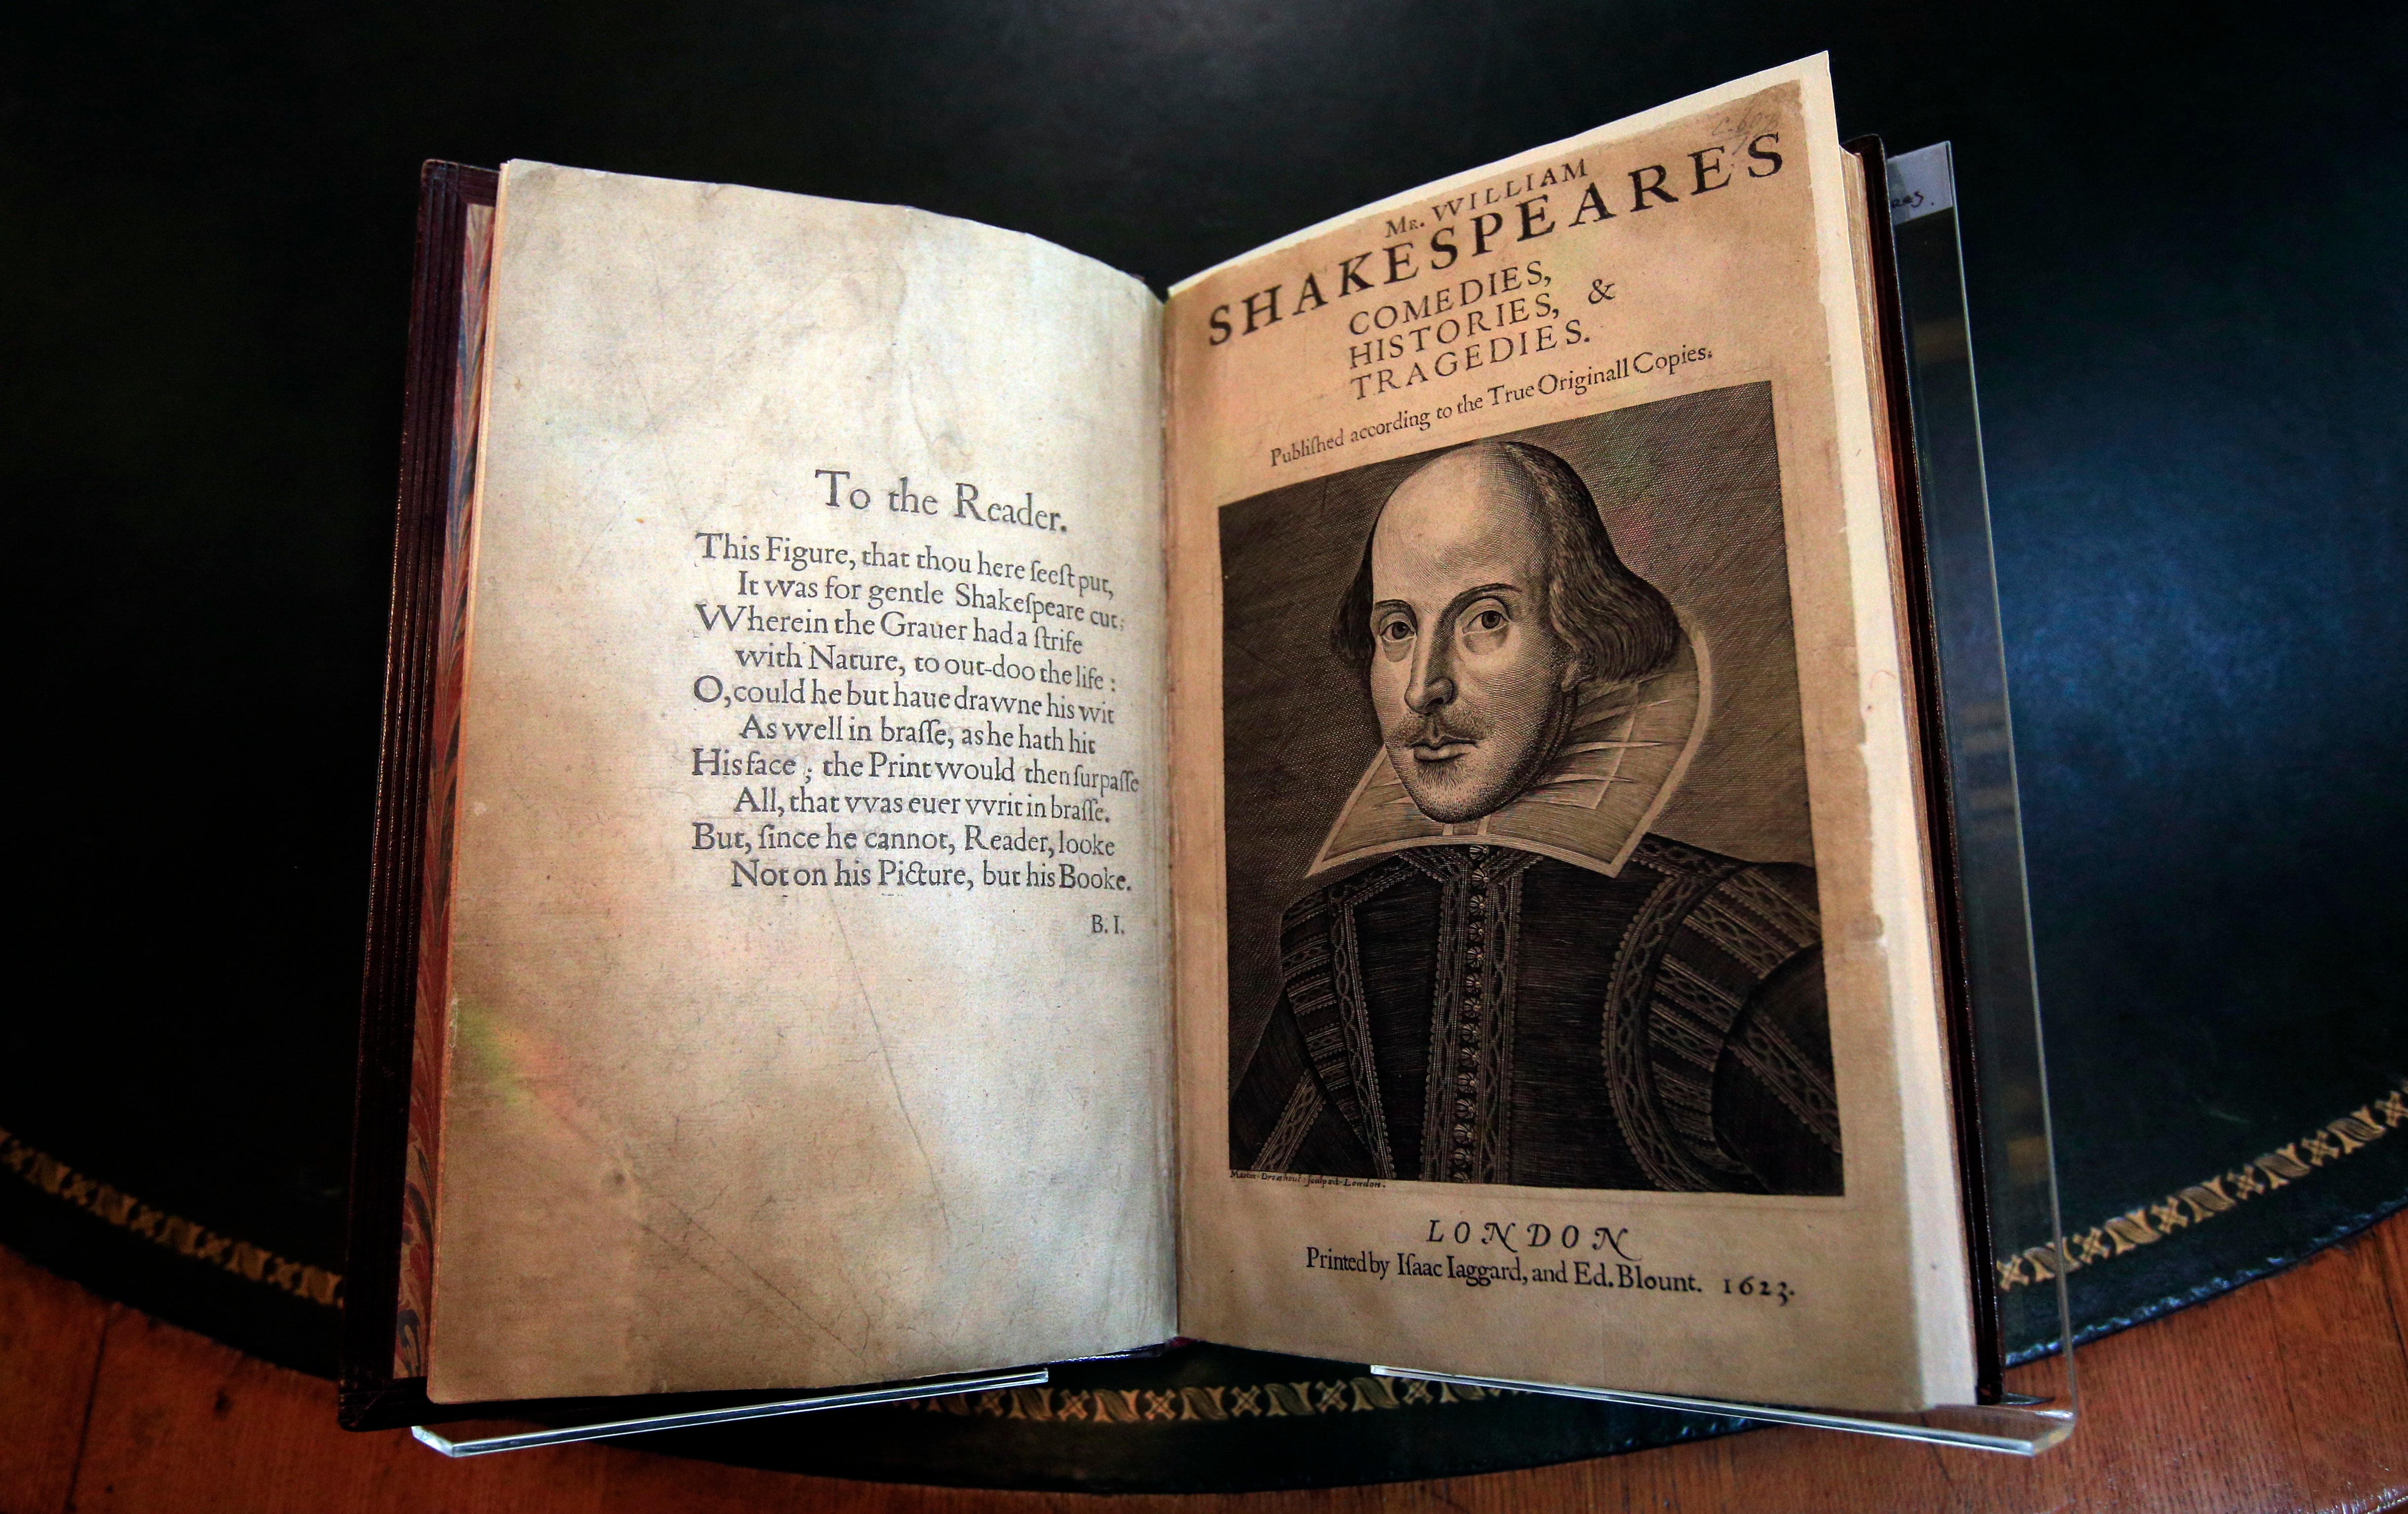 It is 400 years since the first publication of Shakespeare’s plays